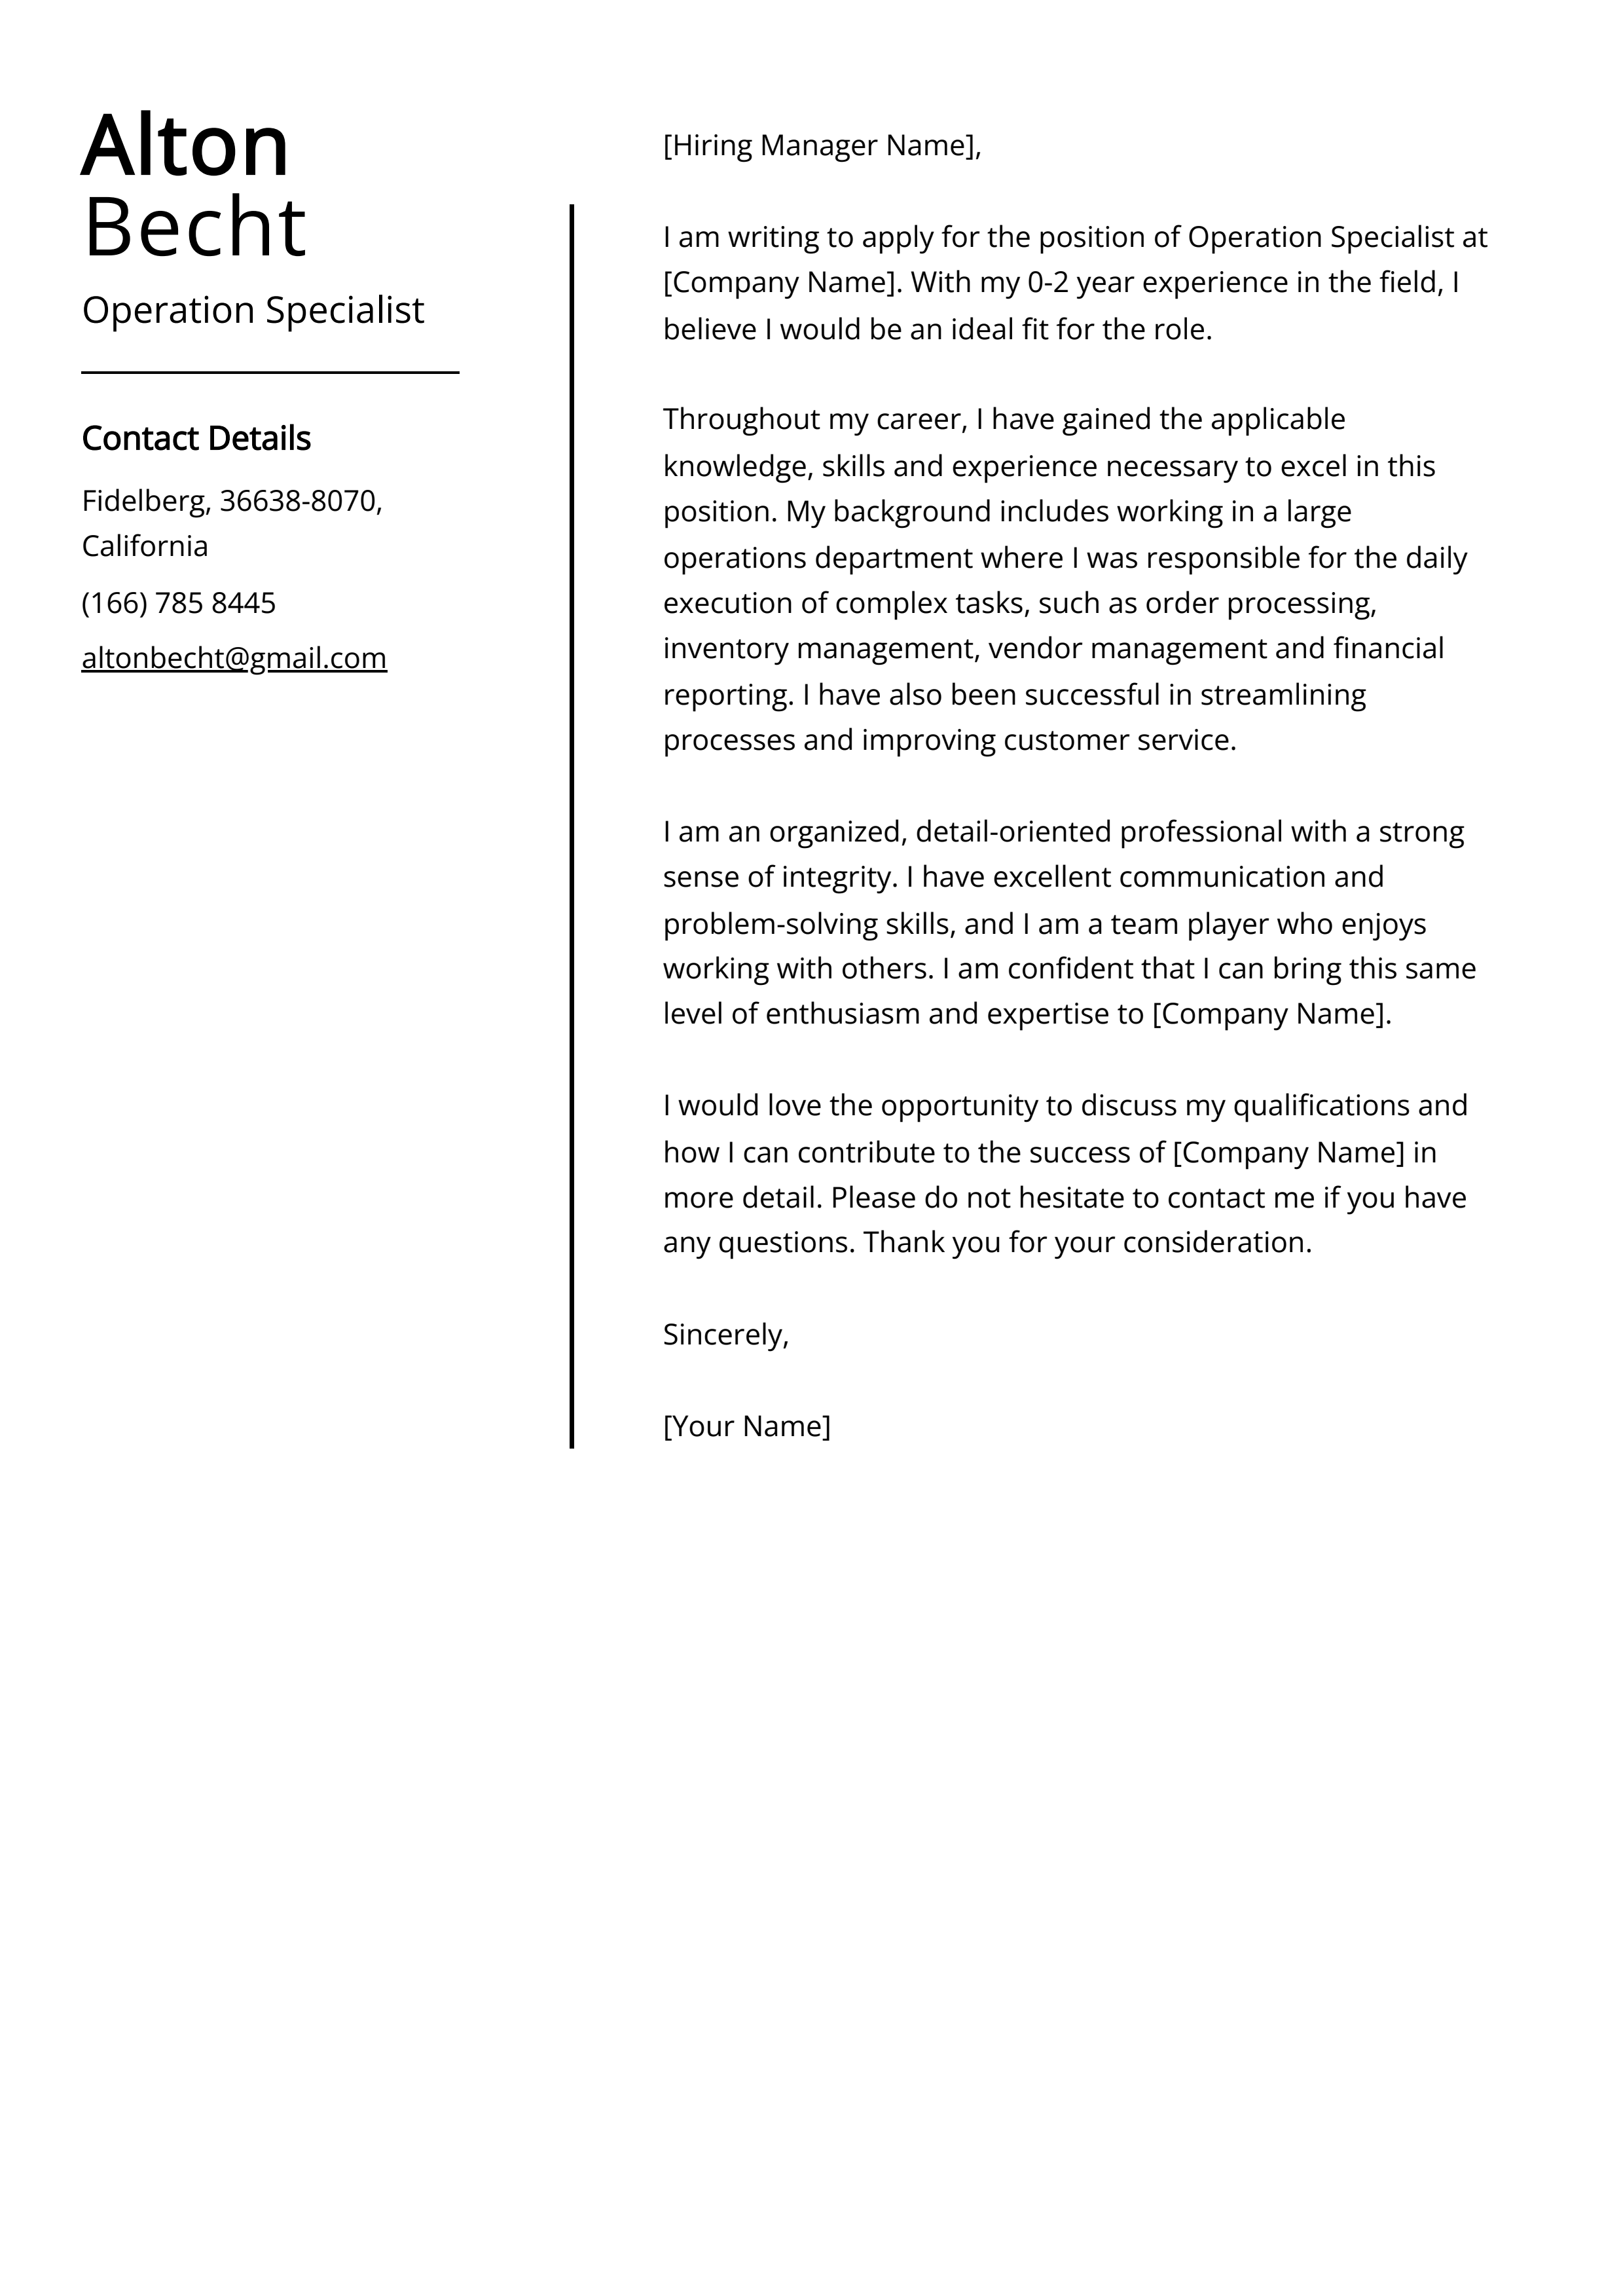 Operation Specialist Cover Letter Example